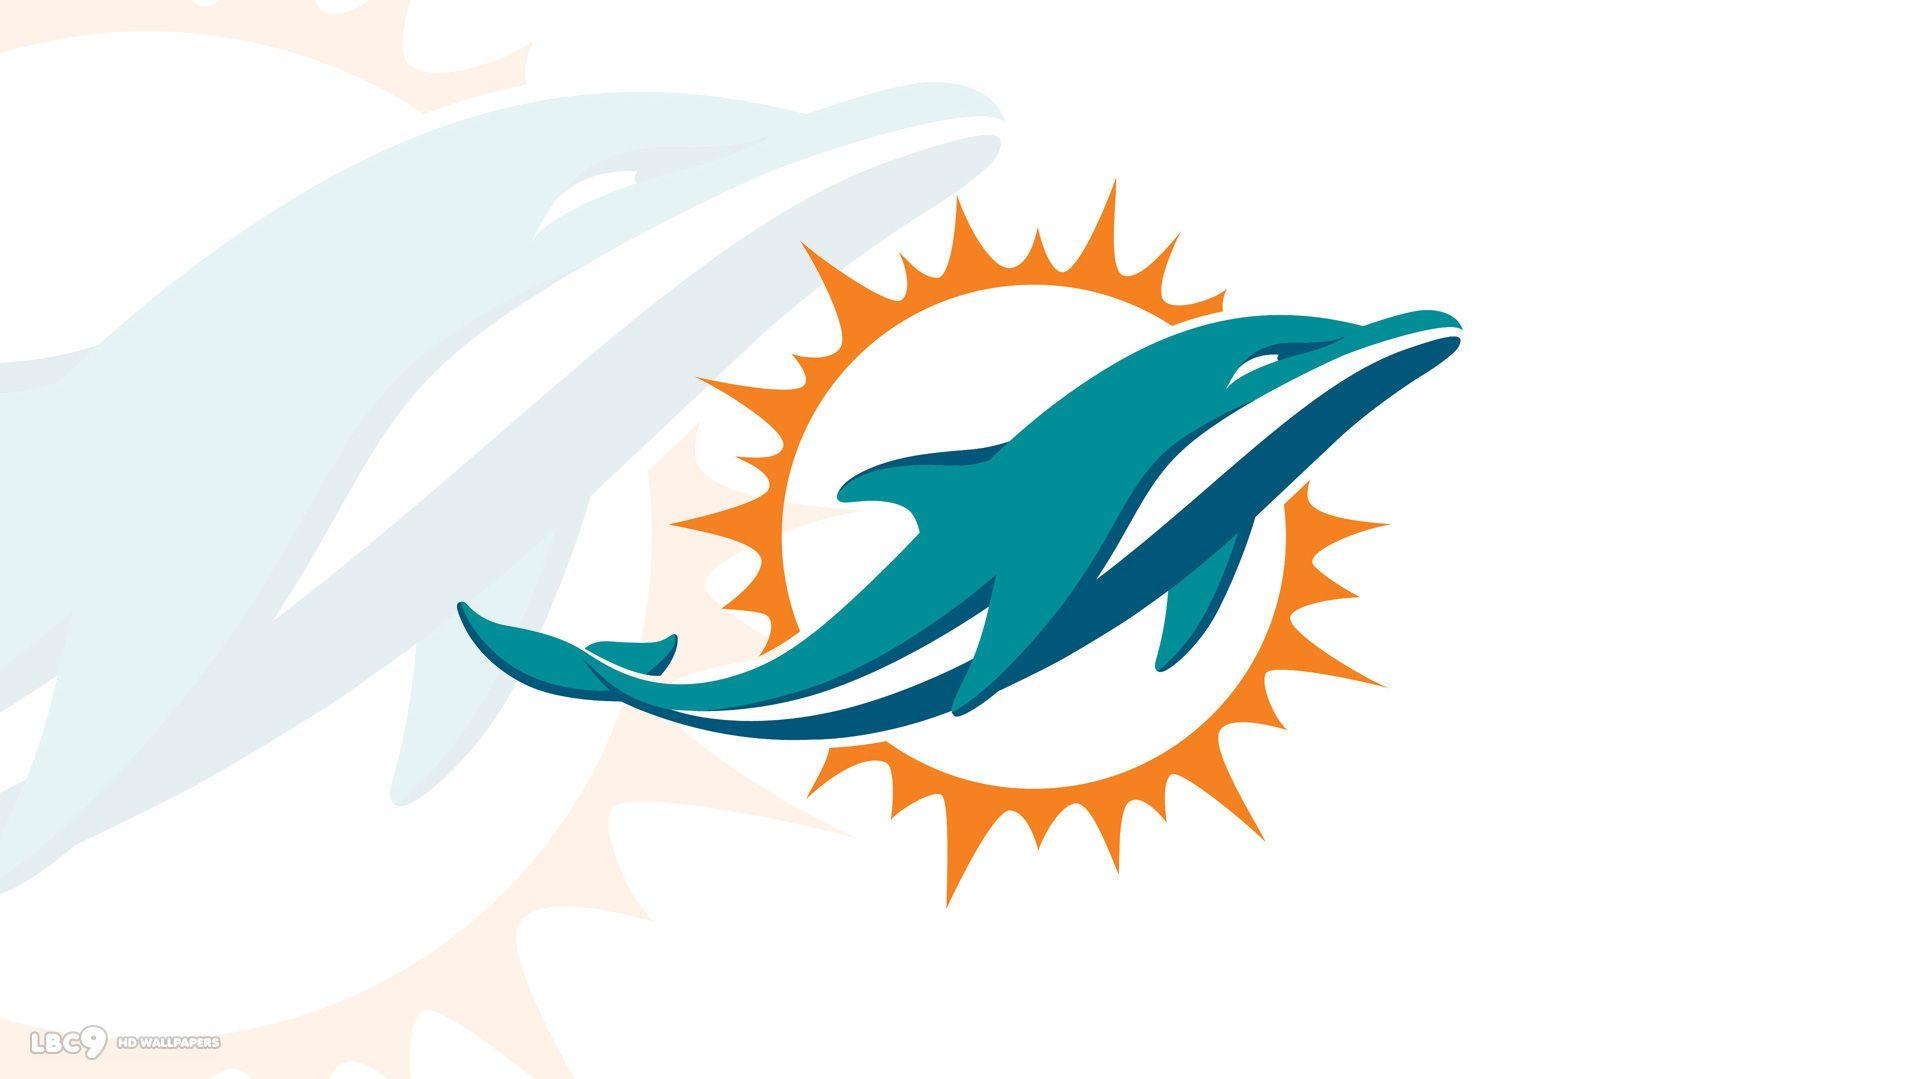 Miami Dolphins Cancer Survivor Carla Hill Is An Inspiration The